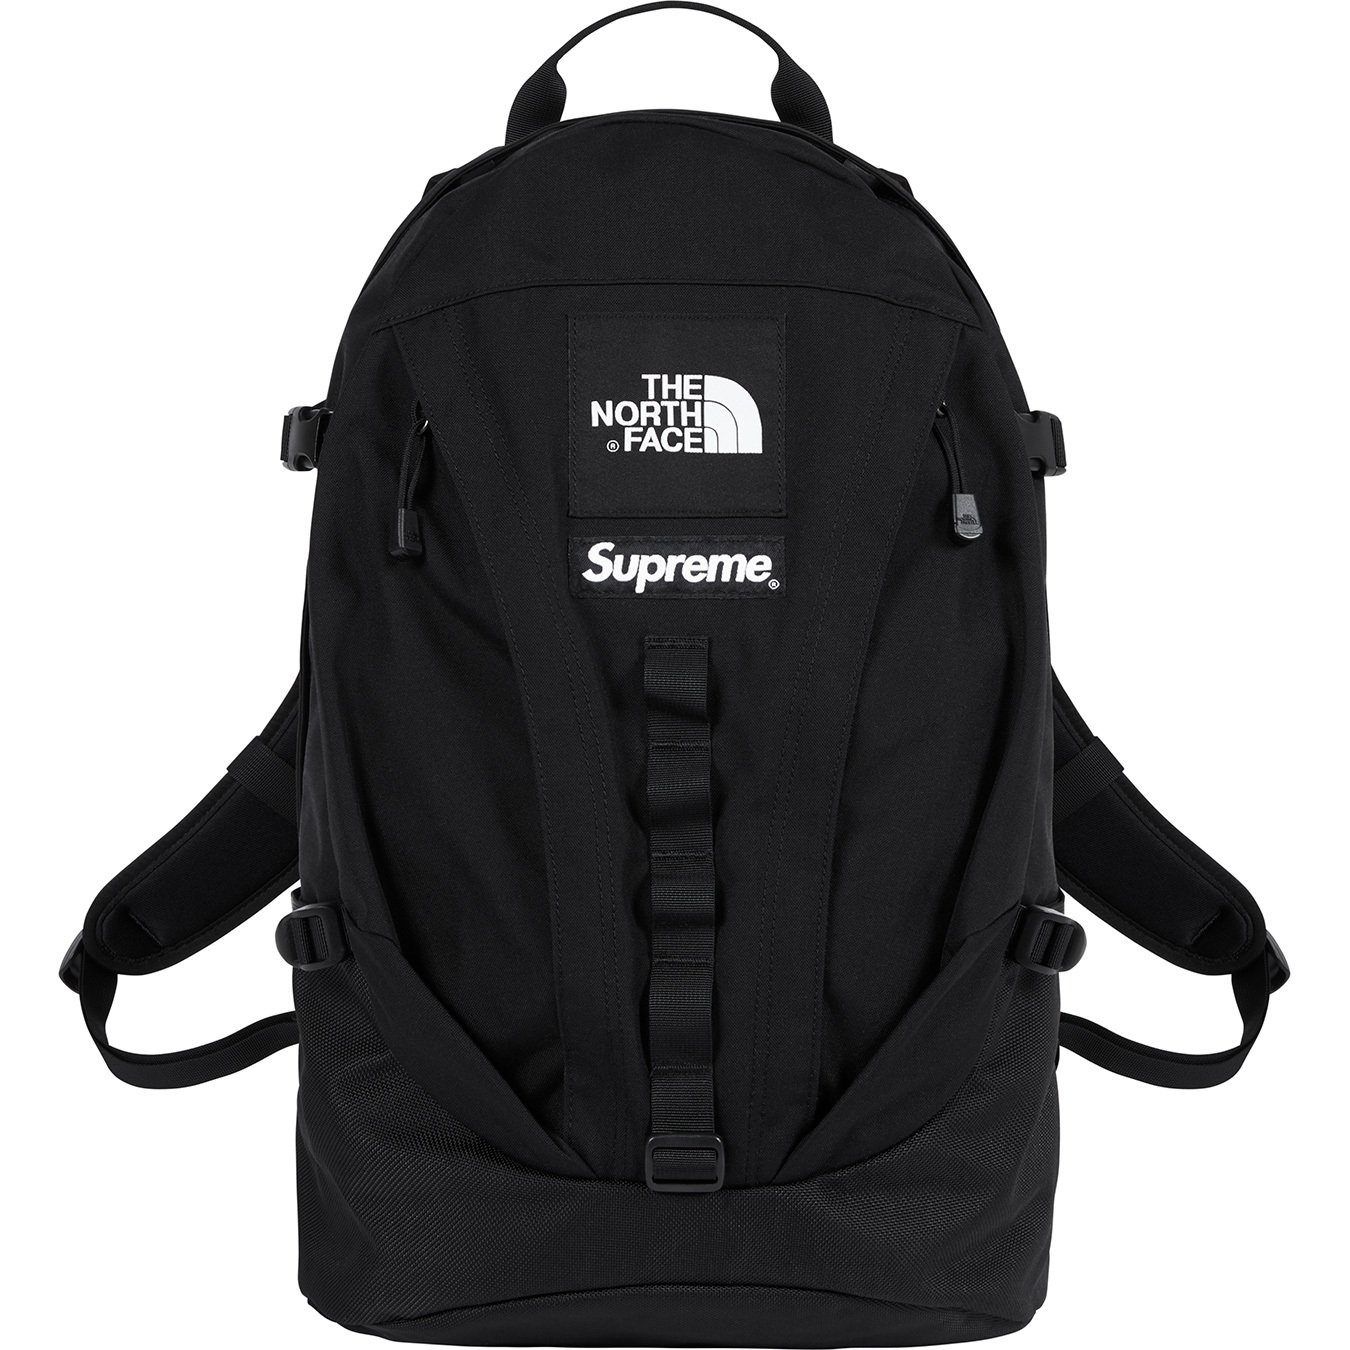 The North Face Expedition Backpack - fall winter 2018 - Supreme